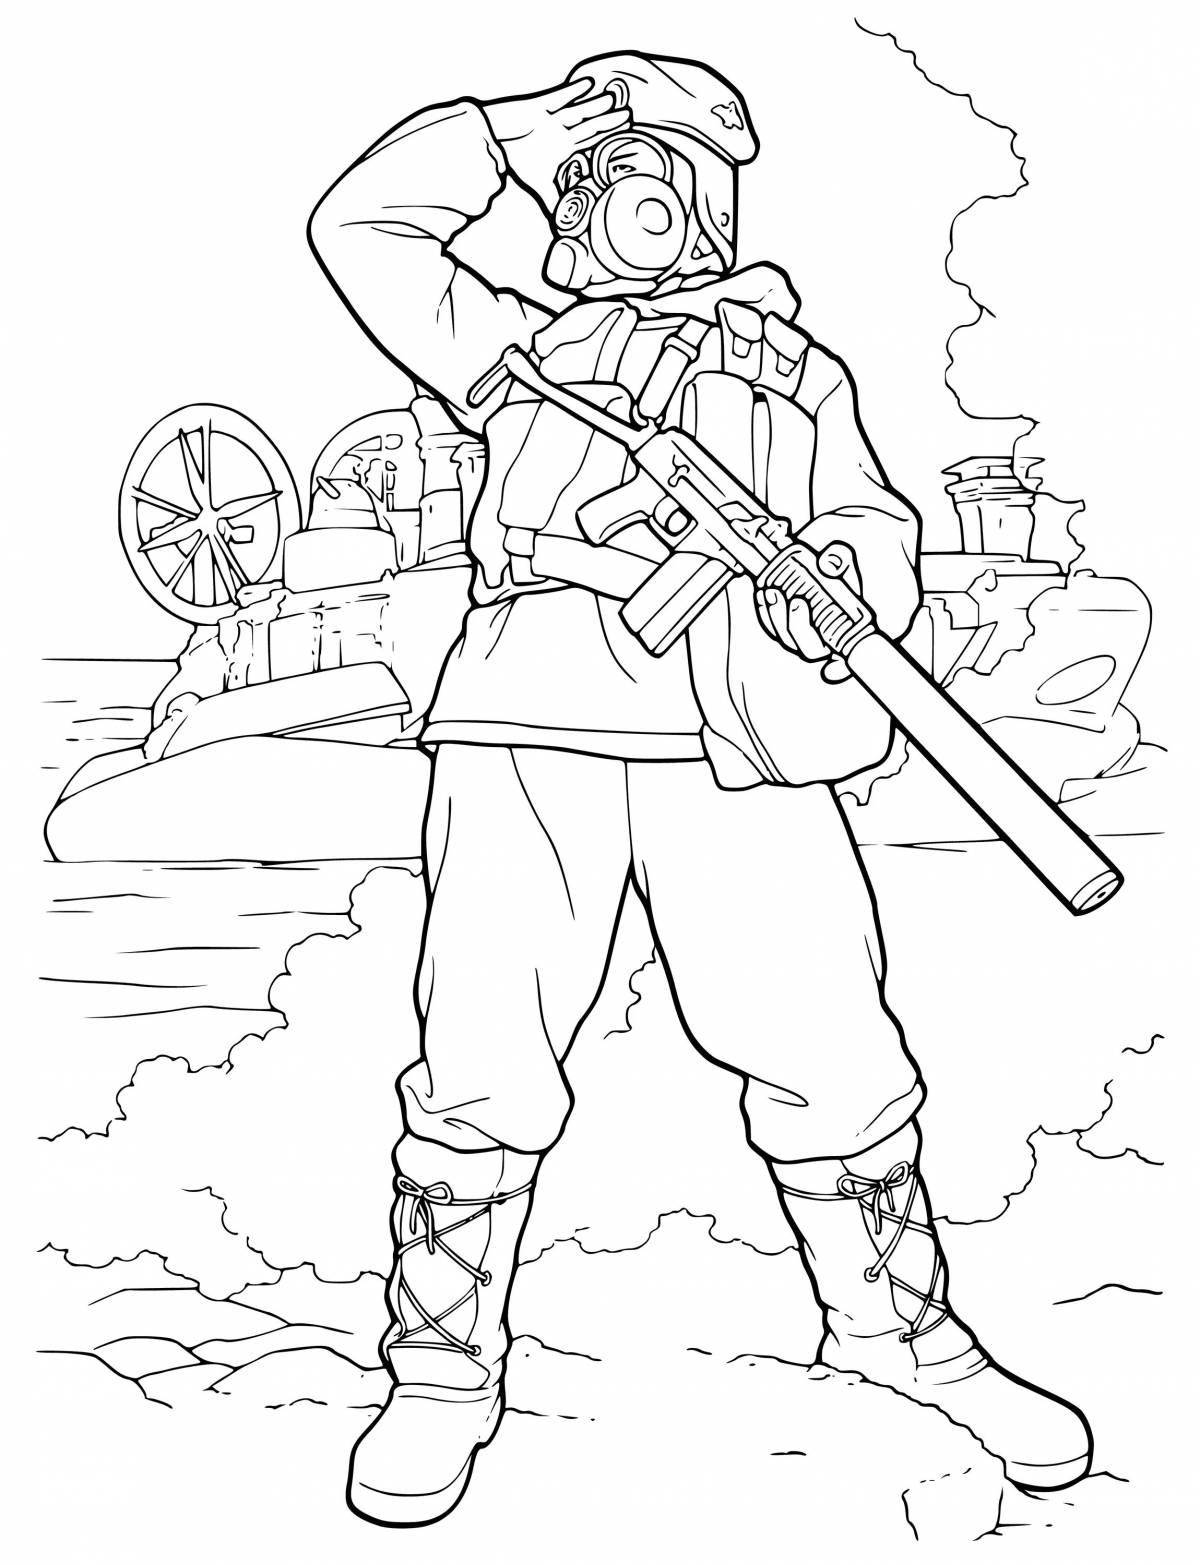 Relentless troops at war coloring page